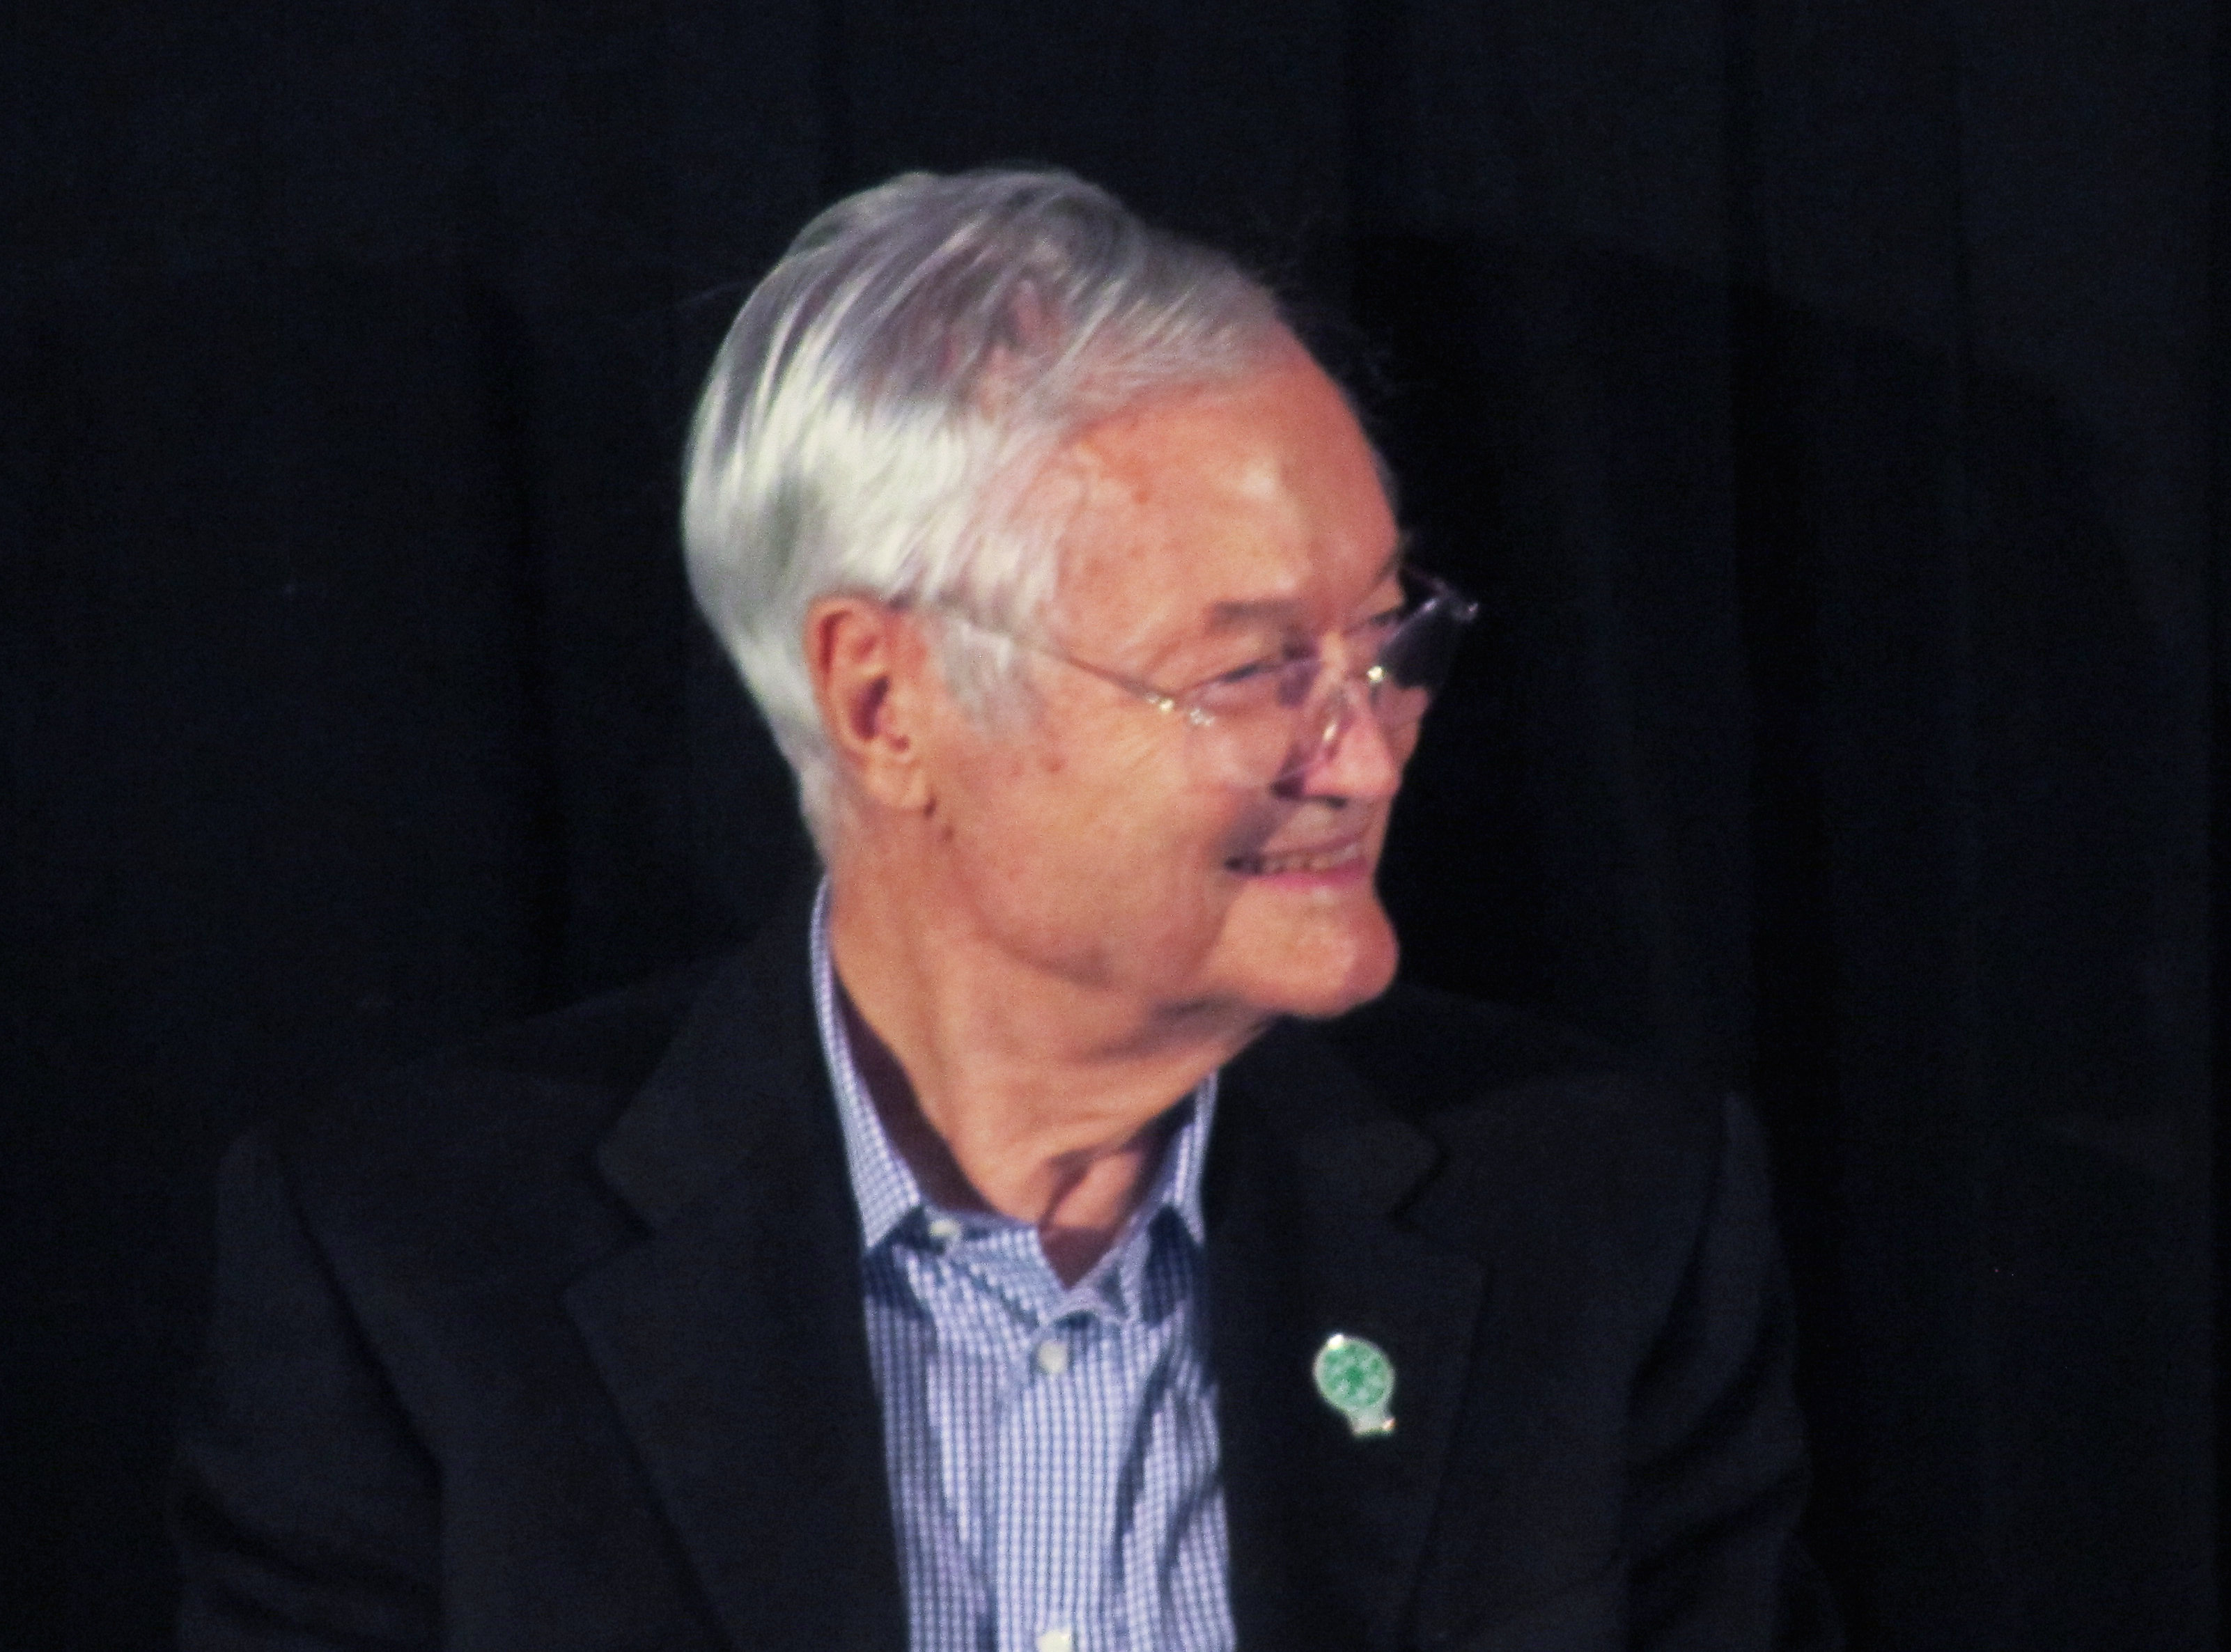 Roger Corman at Tokyo International Film Festival 2012. He is the most famous indie producer/director for more than 411 films. His master pieces are The Little Shop of Horrors (1960); The Intruder (1962) and Edgar Allan Poe movies for A.I.P.. Photographed and edited by the Japanese filmmaker, Corman Award Winner Ryota Nakanishi who is the film editor of the 2013 Amazon bestseller Japanese film Rakugo-Eiga.